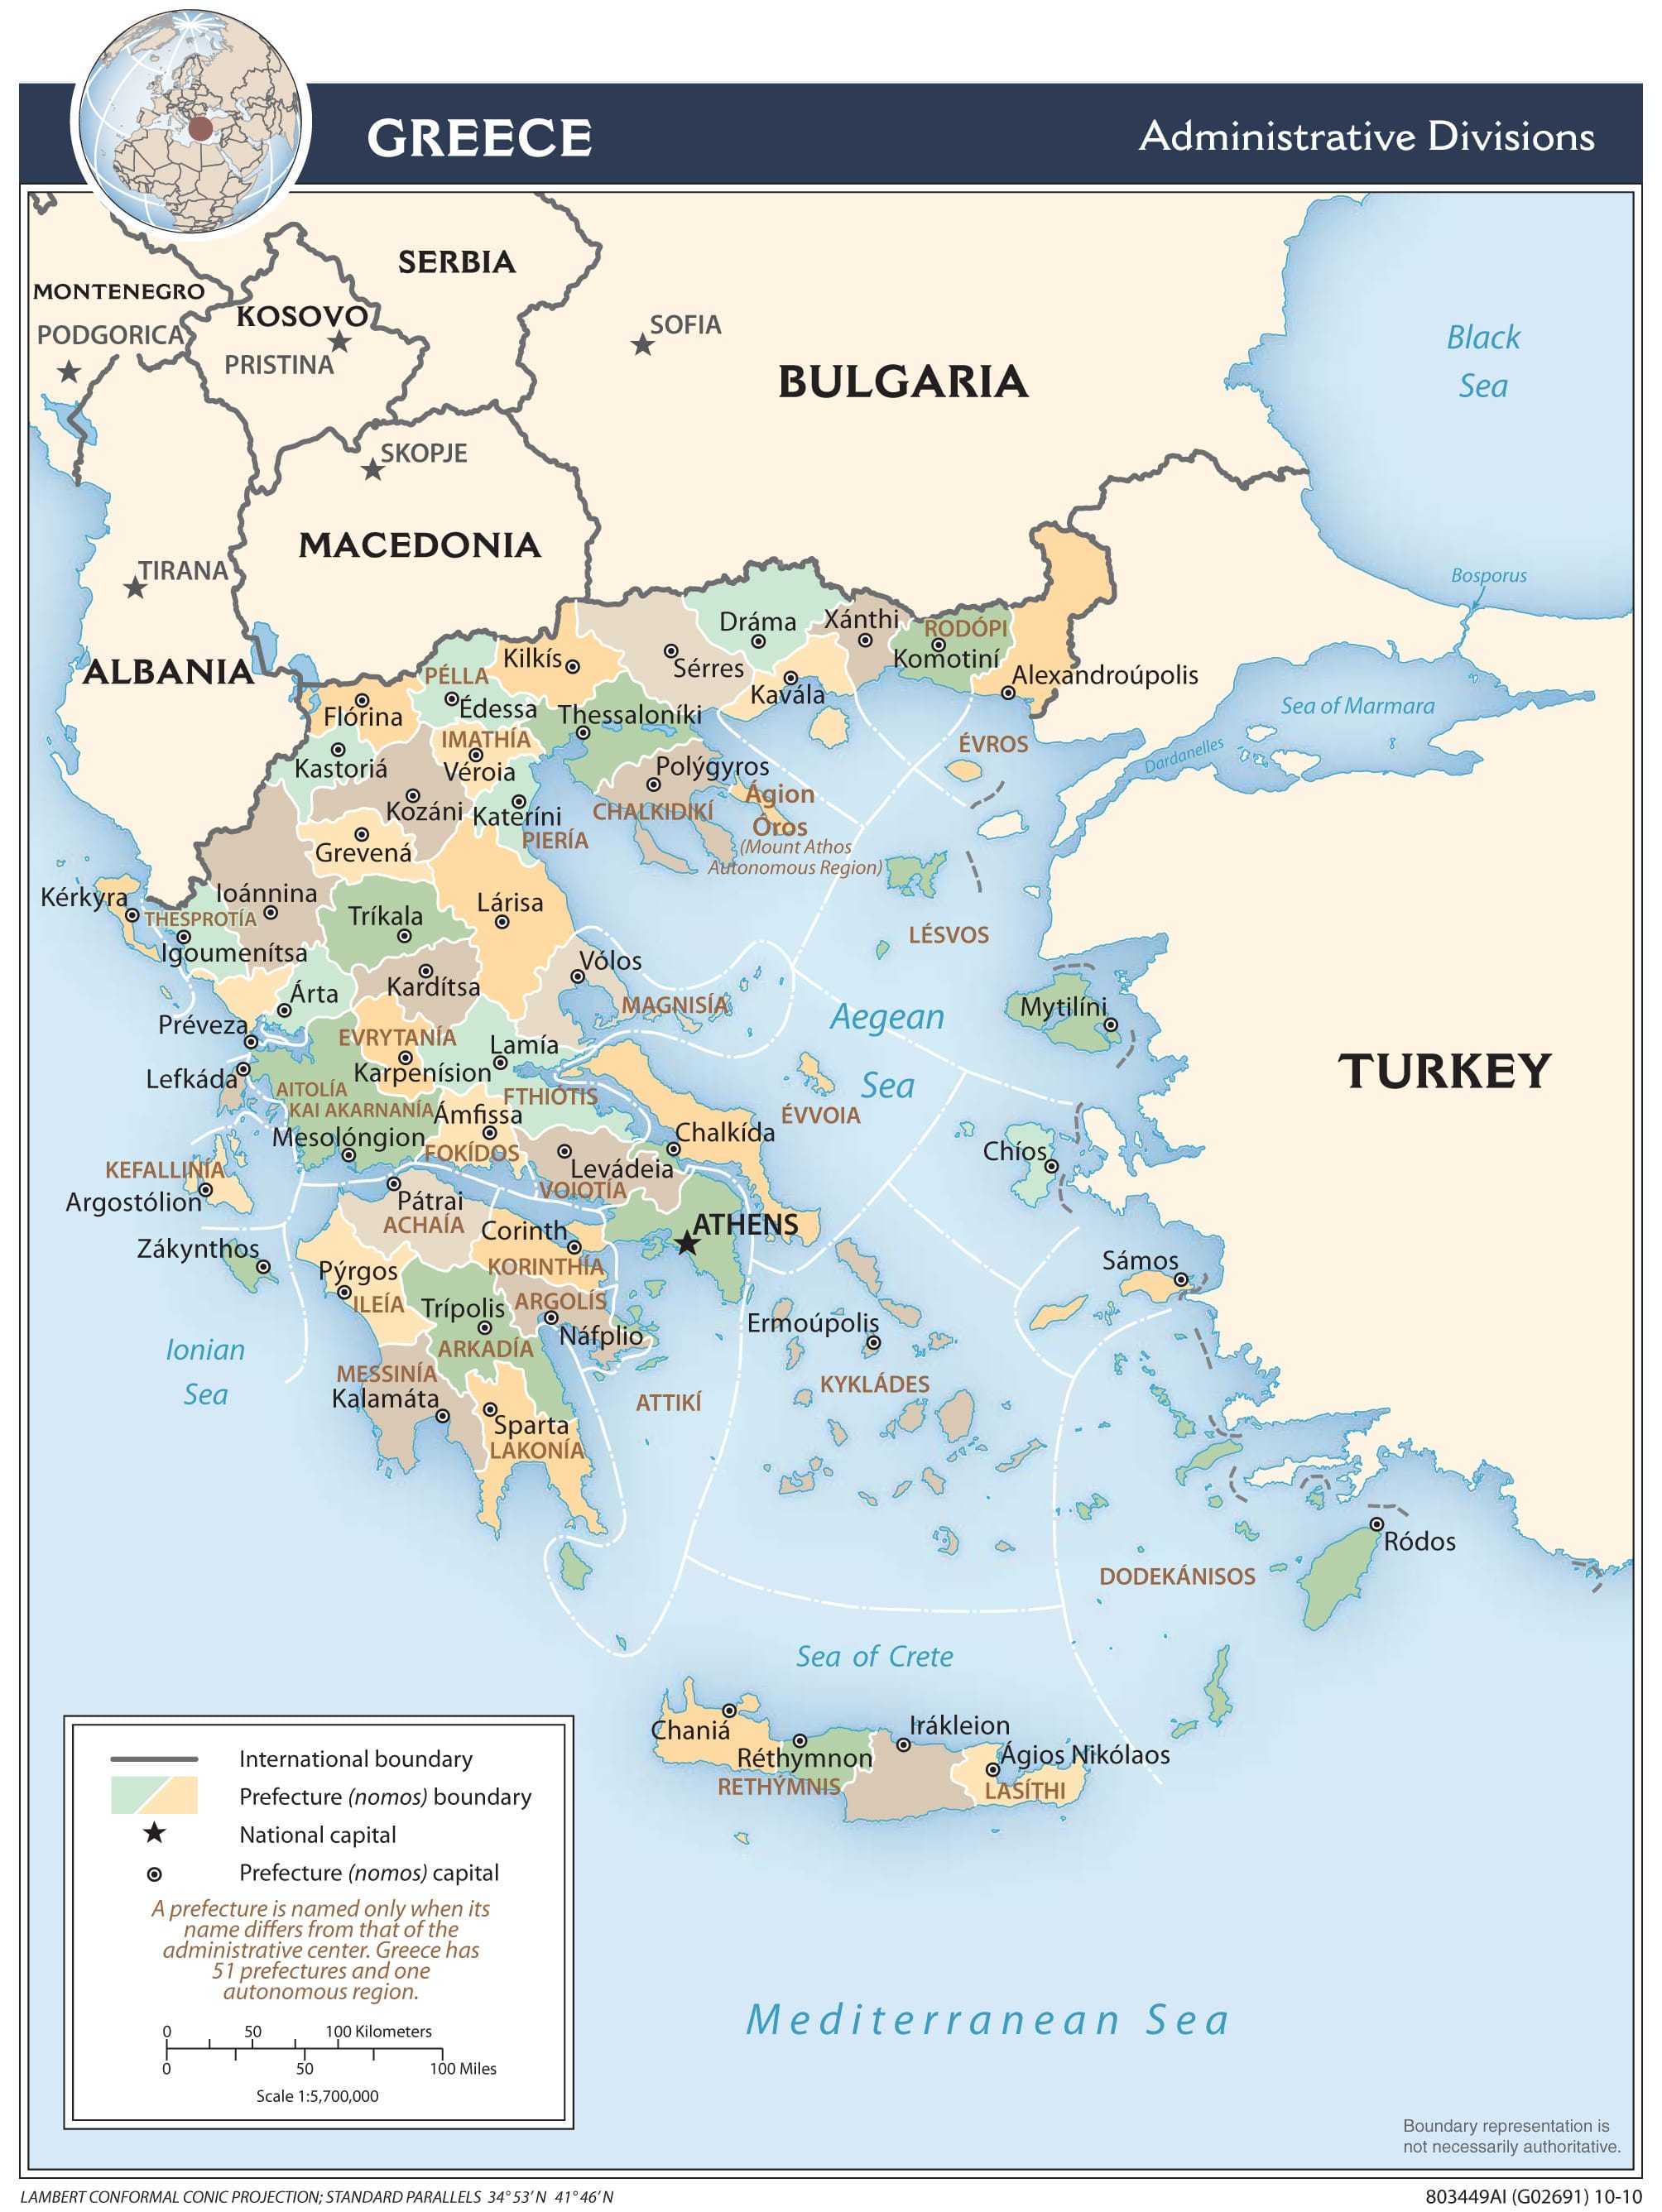 Administrative map of Greece.